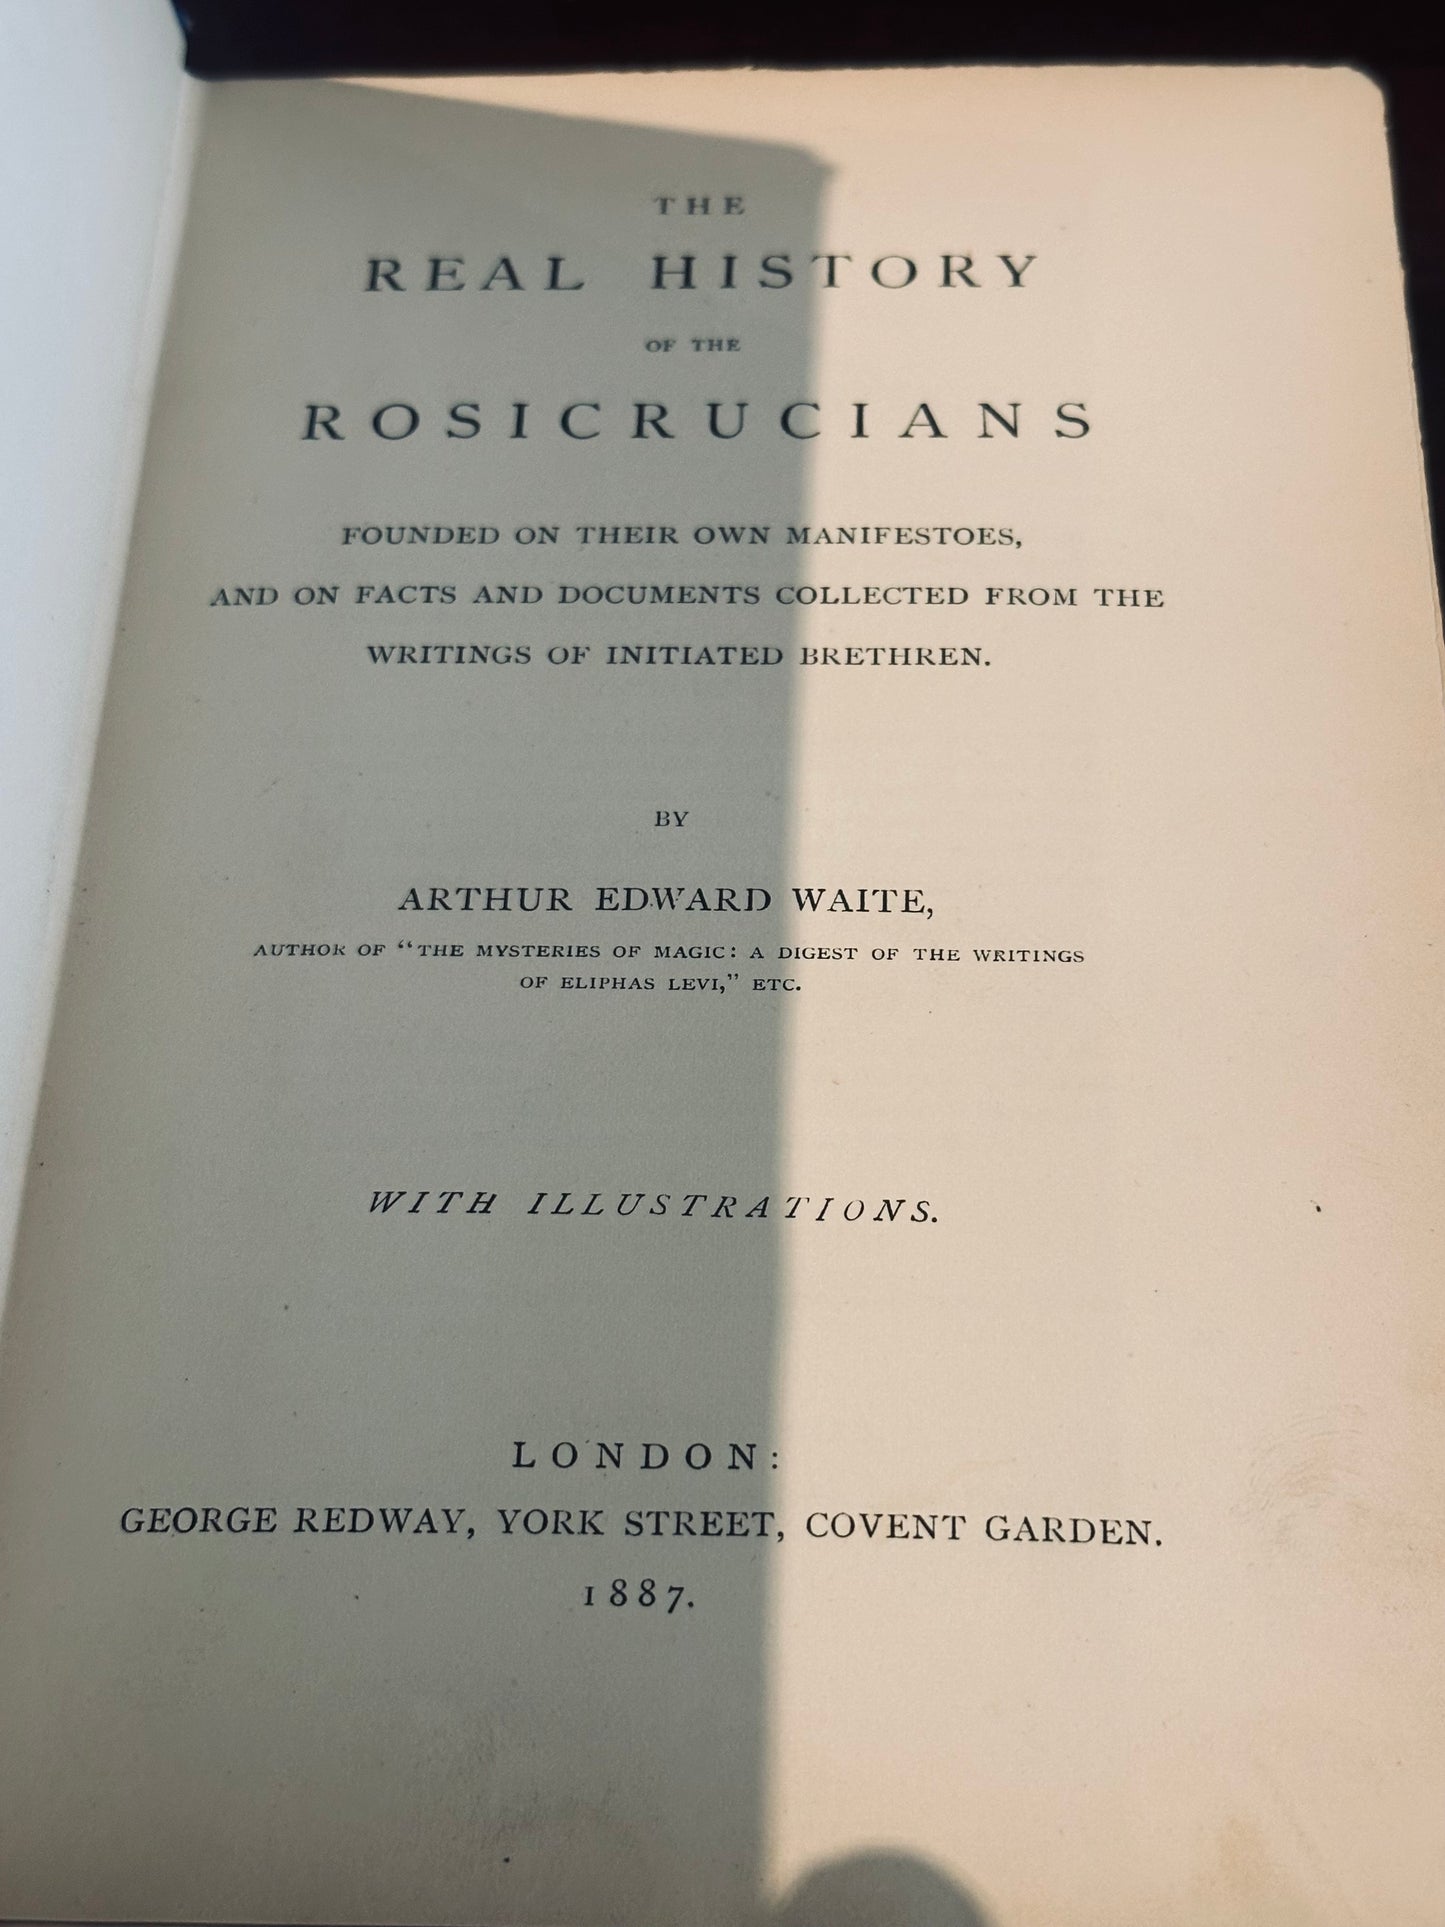 The Real History of The Rosicrucians by A.E. Waite